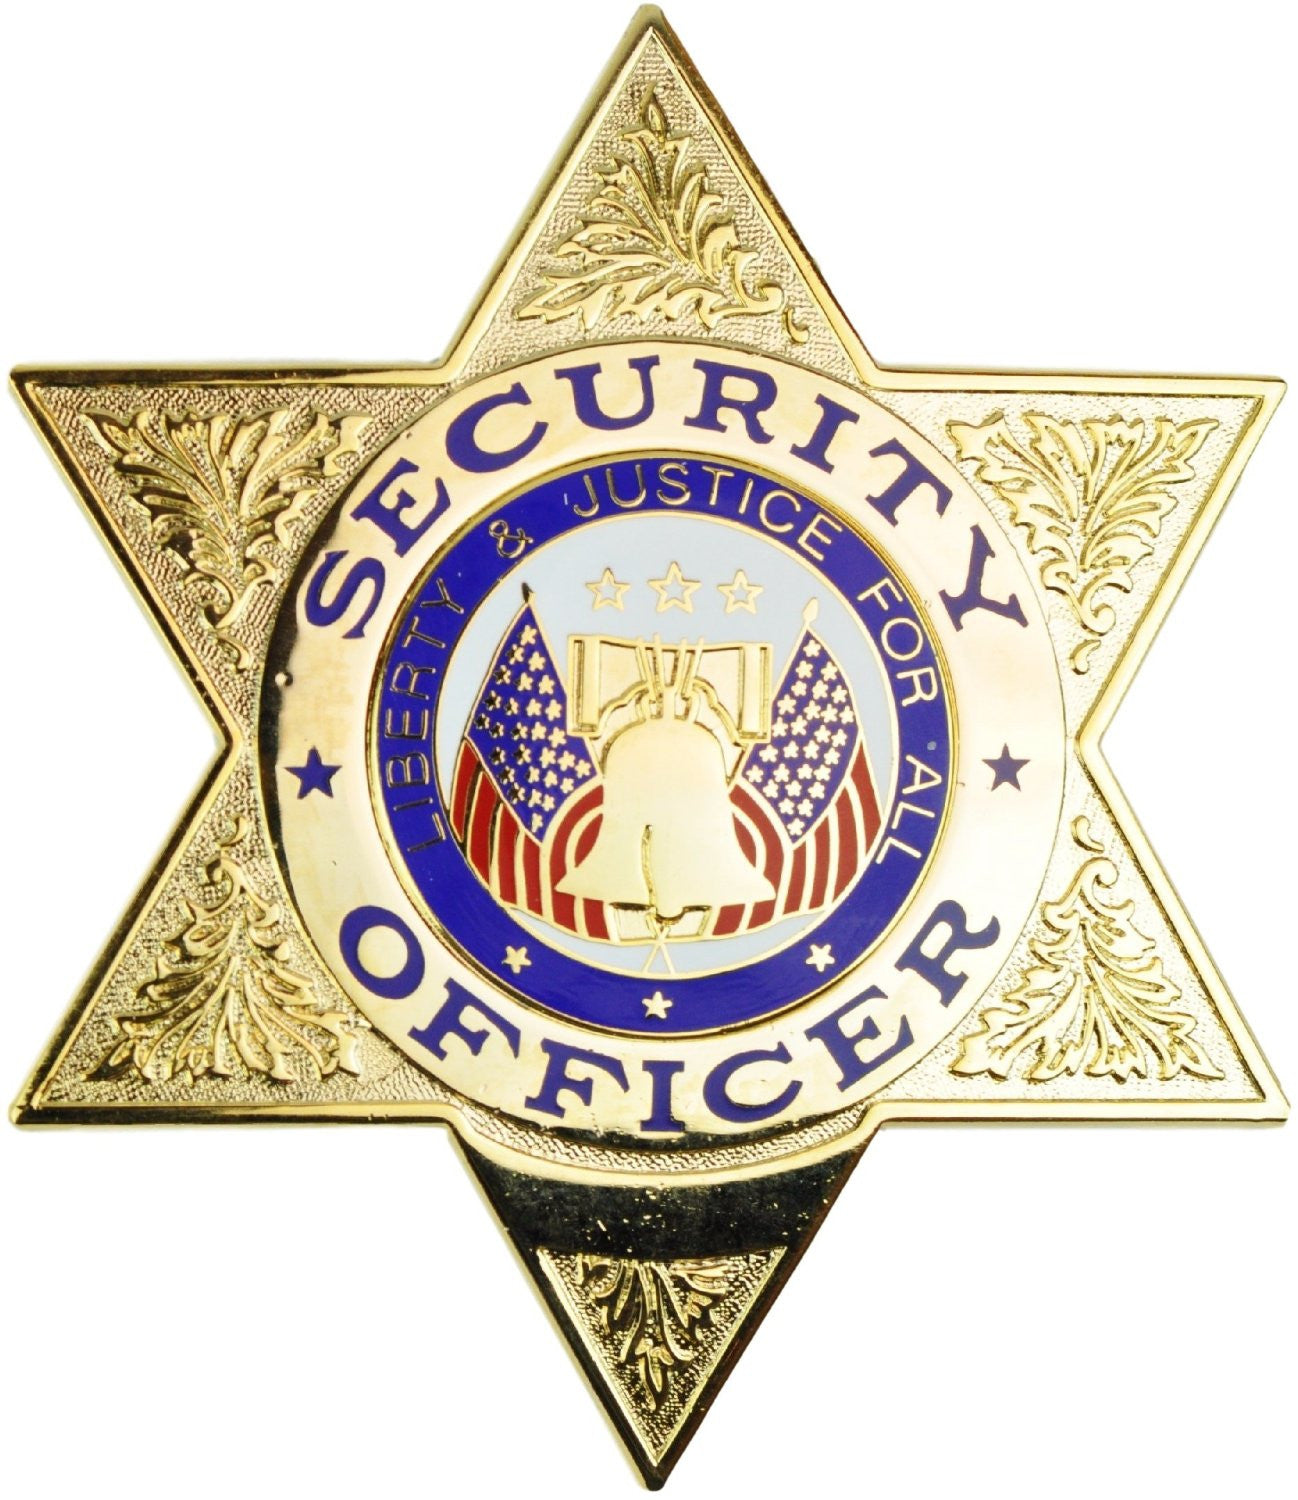 Tactical 365® Operation First Response Security Guard Shield Badge